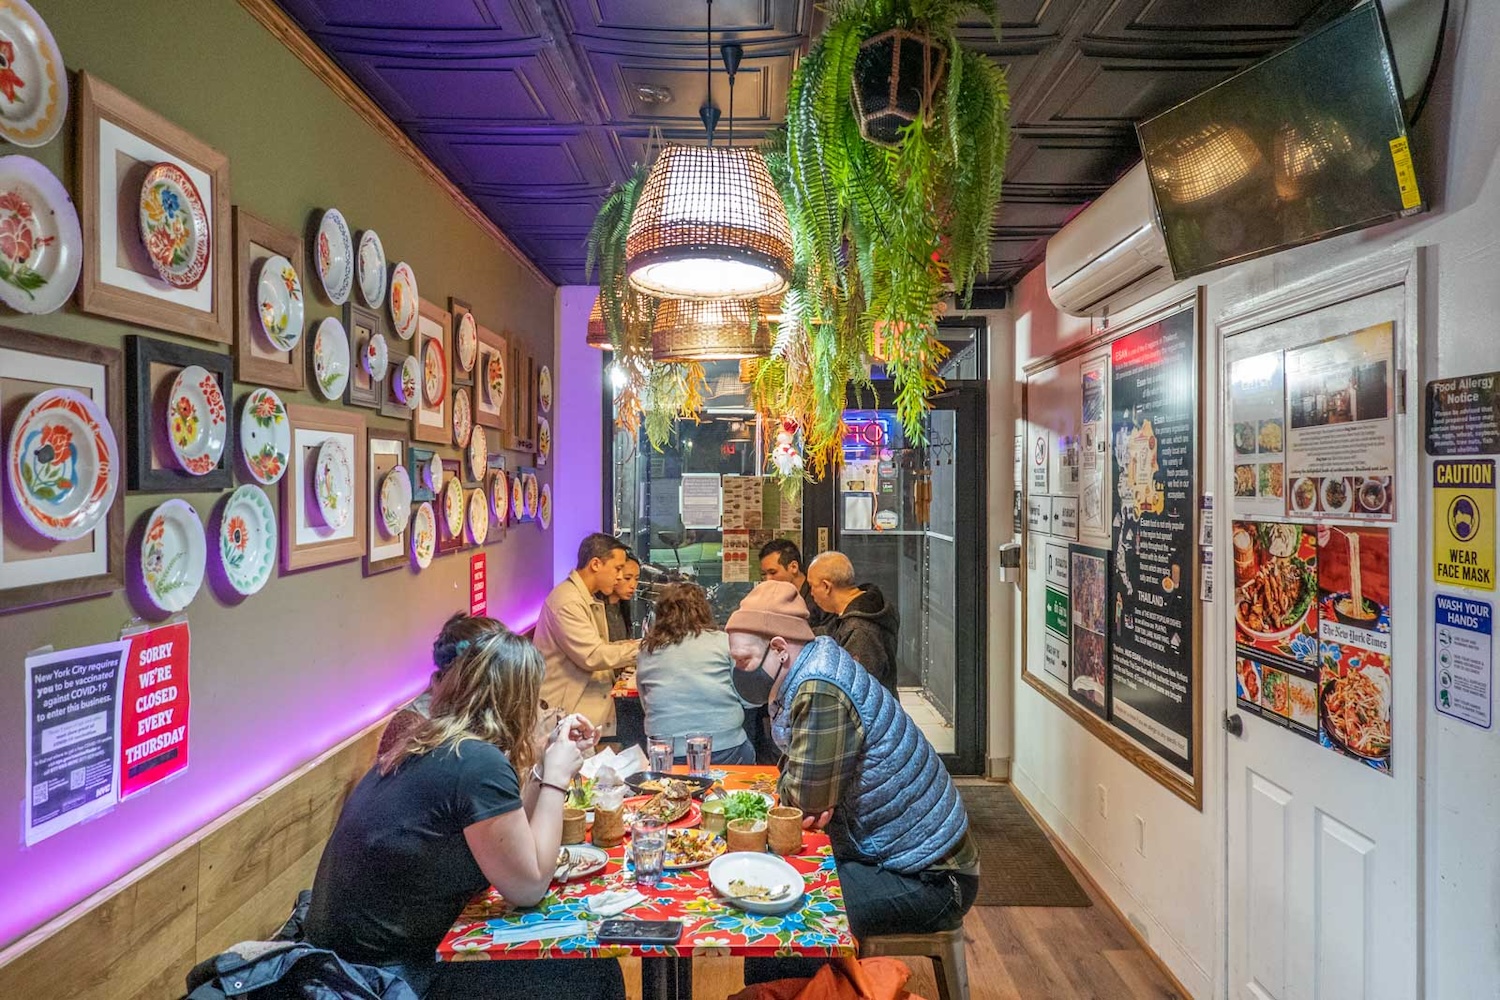 colorful room, people sitting at table with food, lamps and plants hanging, art on wall